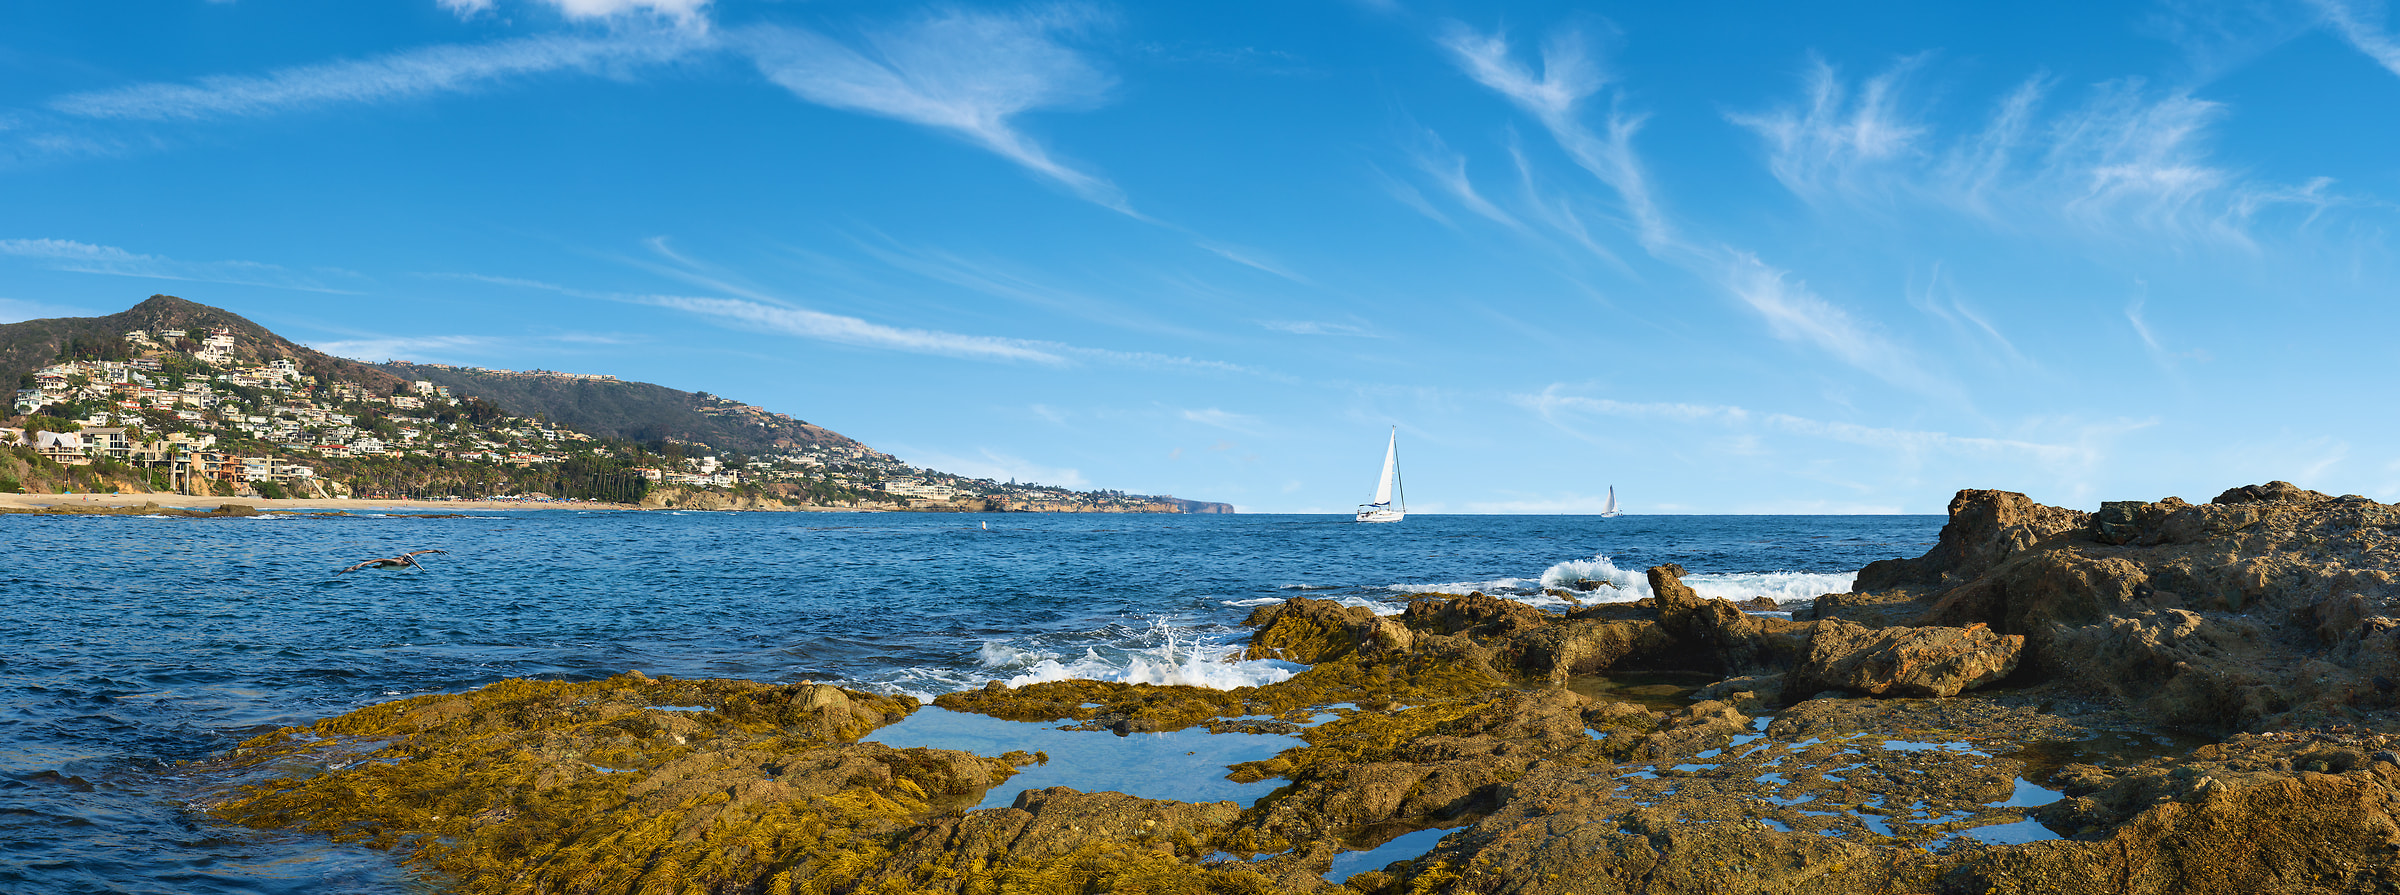 141 megapixels! A very high resolution, large-format VAST photo print of a sailboat on the ocean with rocks and waves in the foreground; seascape photograph created by Jim Tarpo in Laguna Beach, California